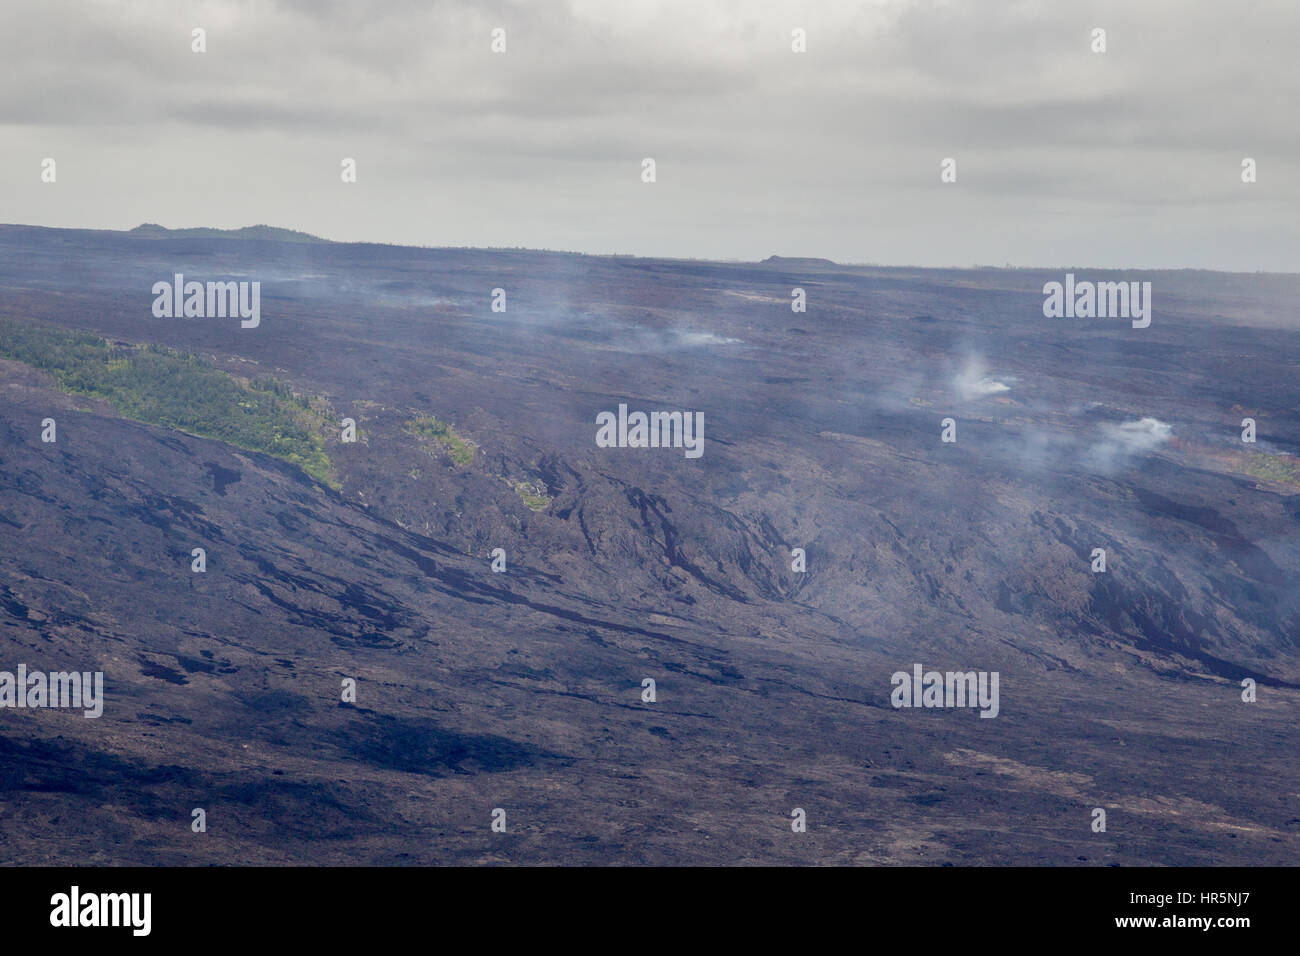 Aerial shot of volcanic fumes rising from the slopes of the active volcano Kilauea on Big Island, Hawaii, USA. Stock Photo